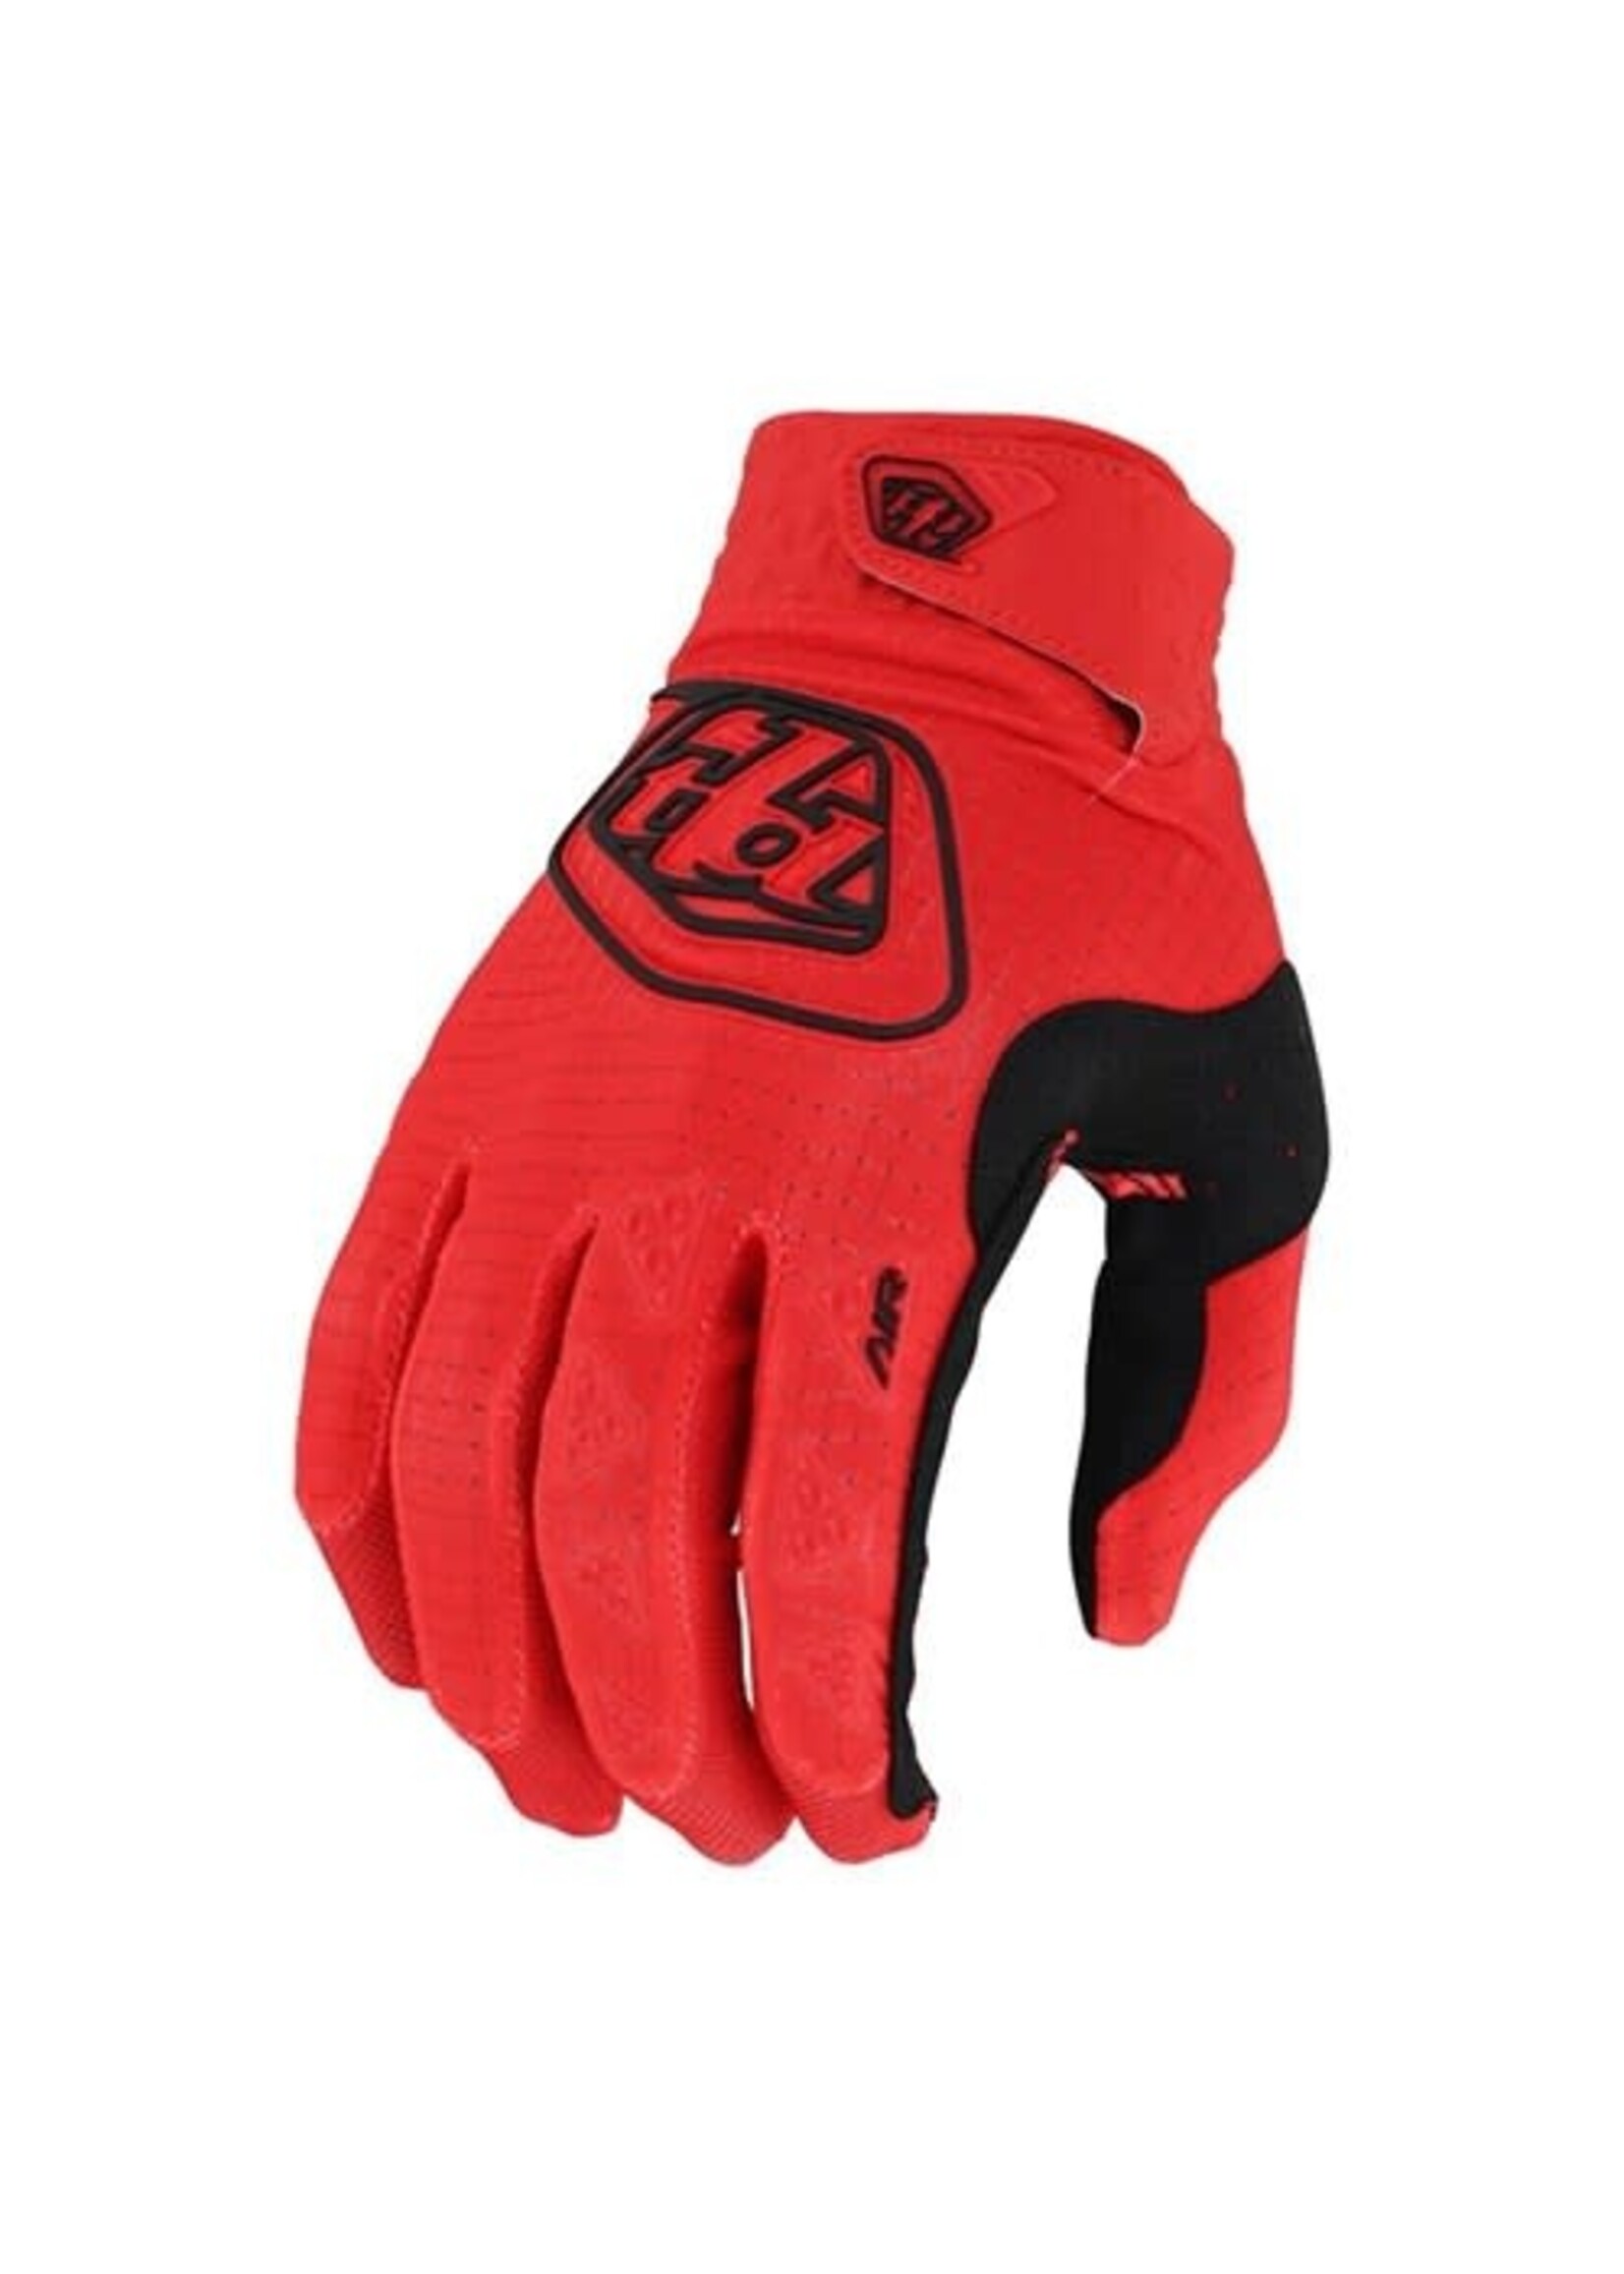 Troylee Designs Glove TLD 24.1 Air Youth